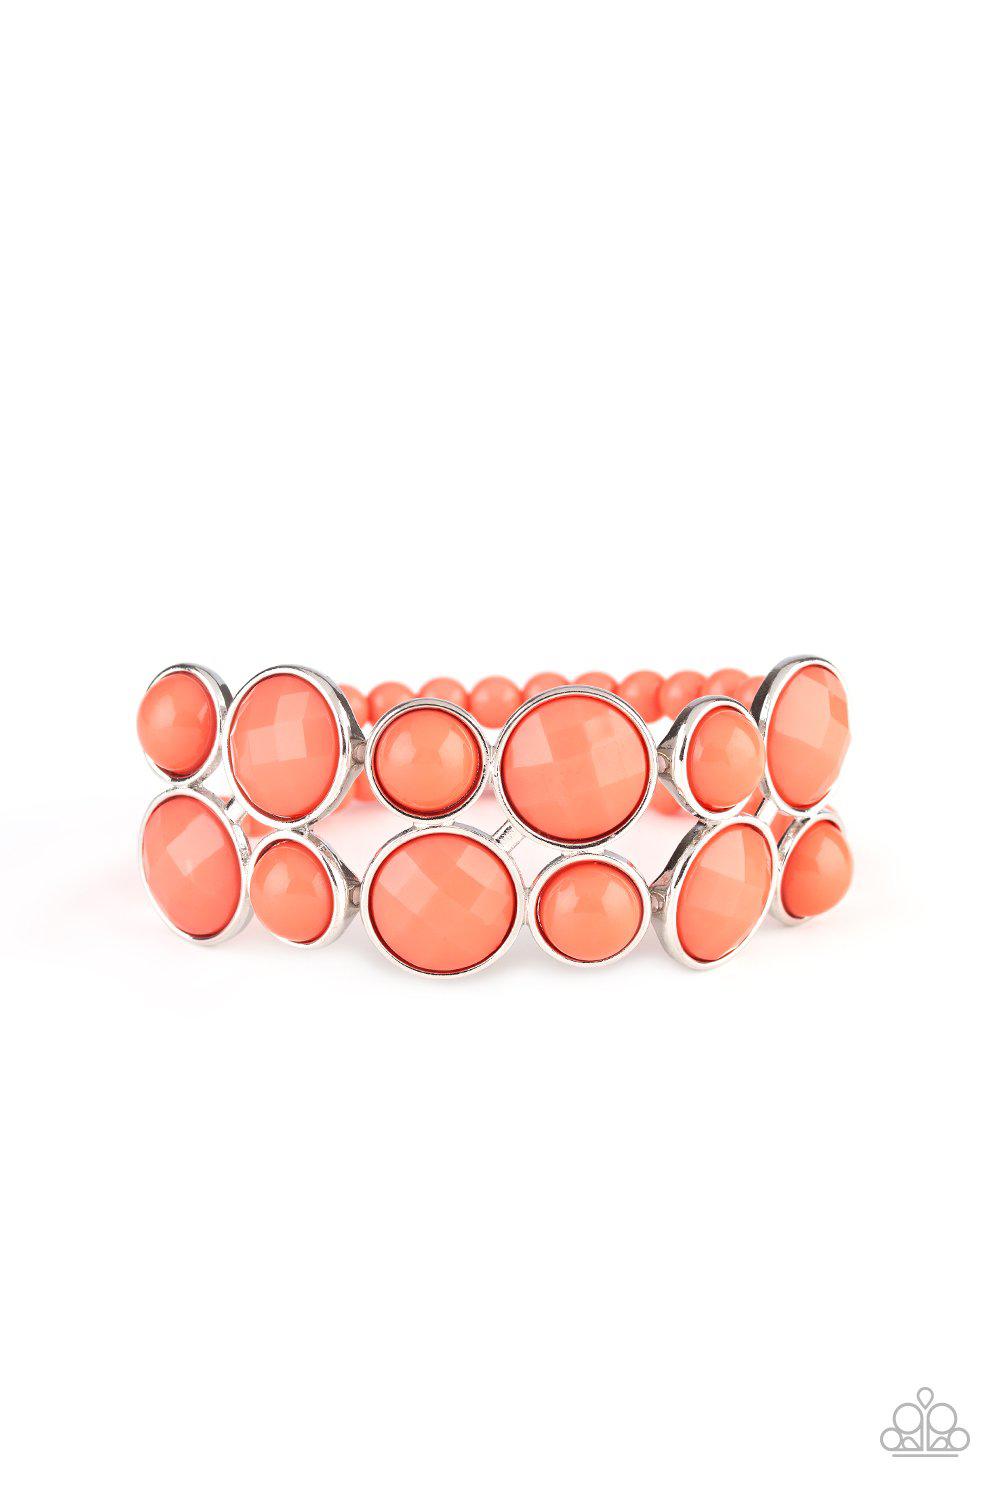 Confection Connection Coral Bracelet - Paparazzi Accessories-CarasShop.com - $5 Jewelry by Cara Jewels